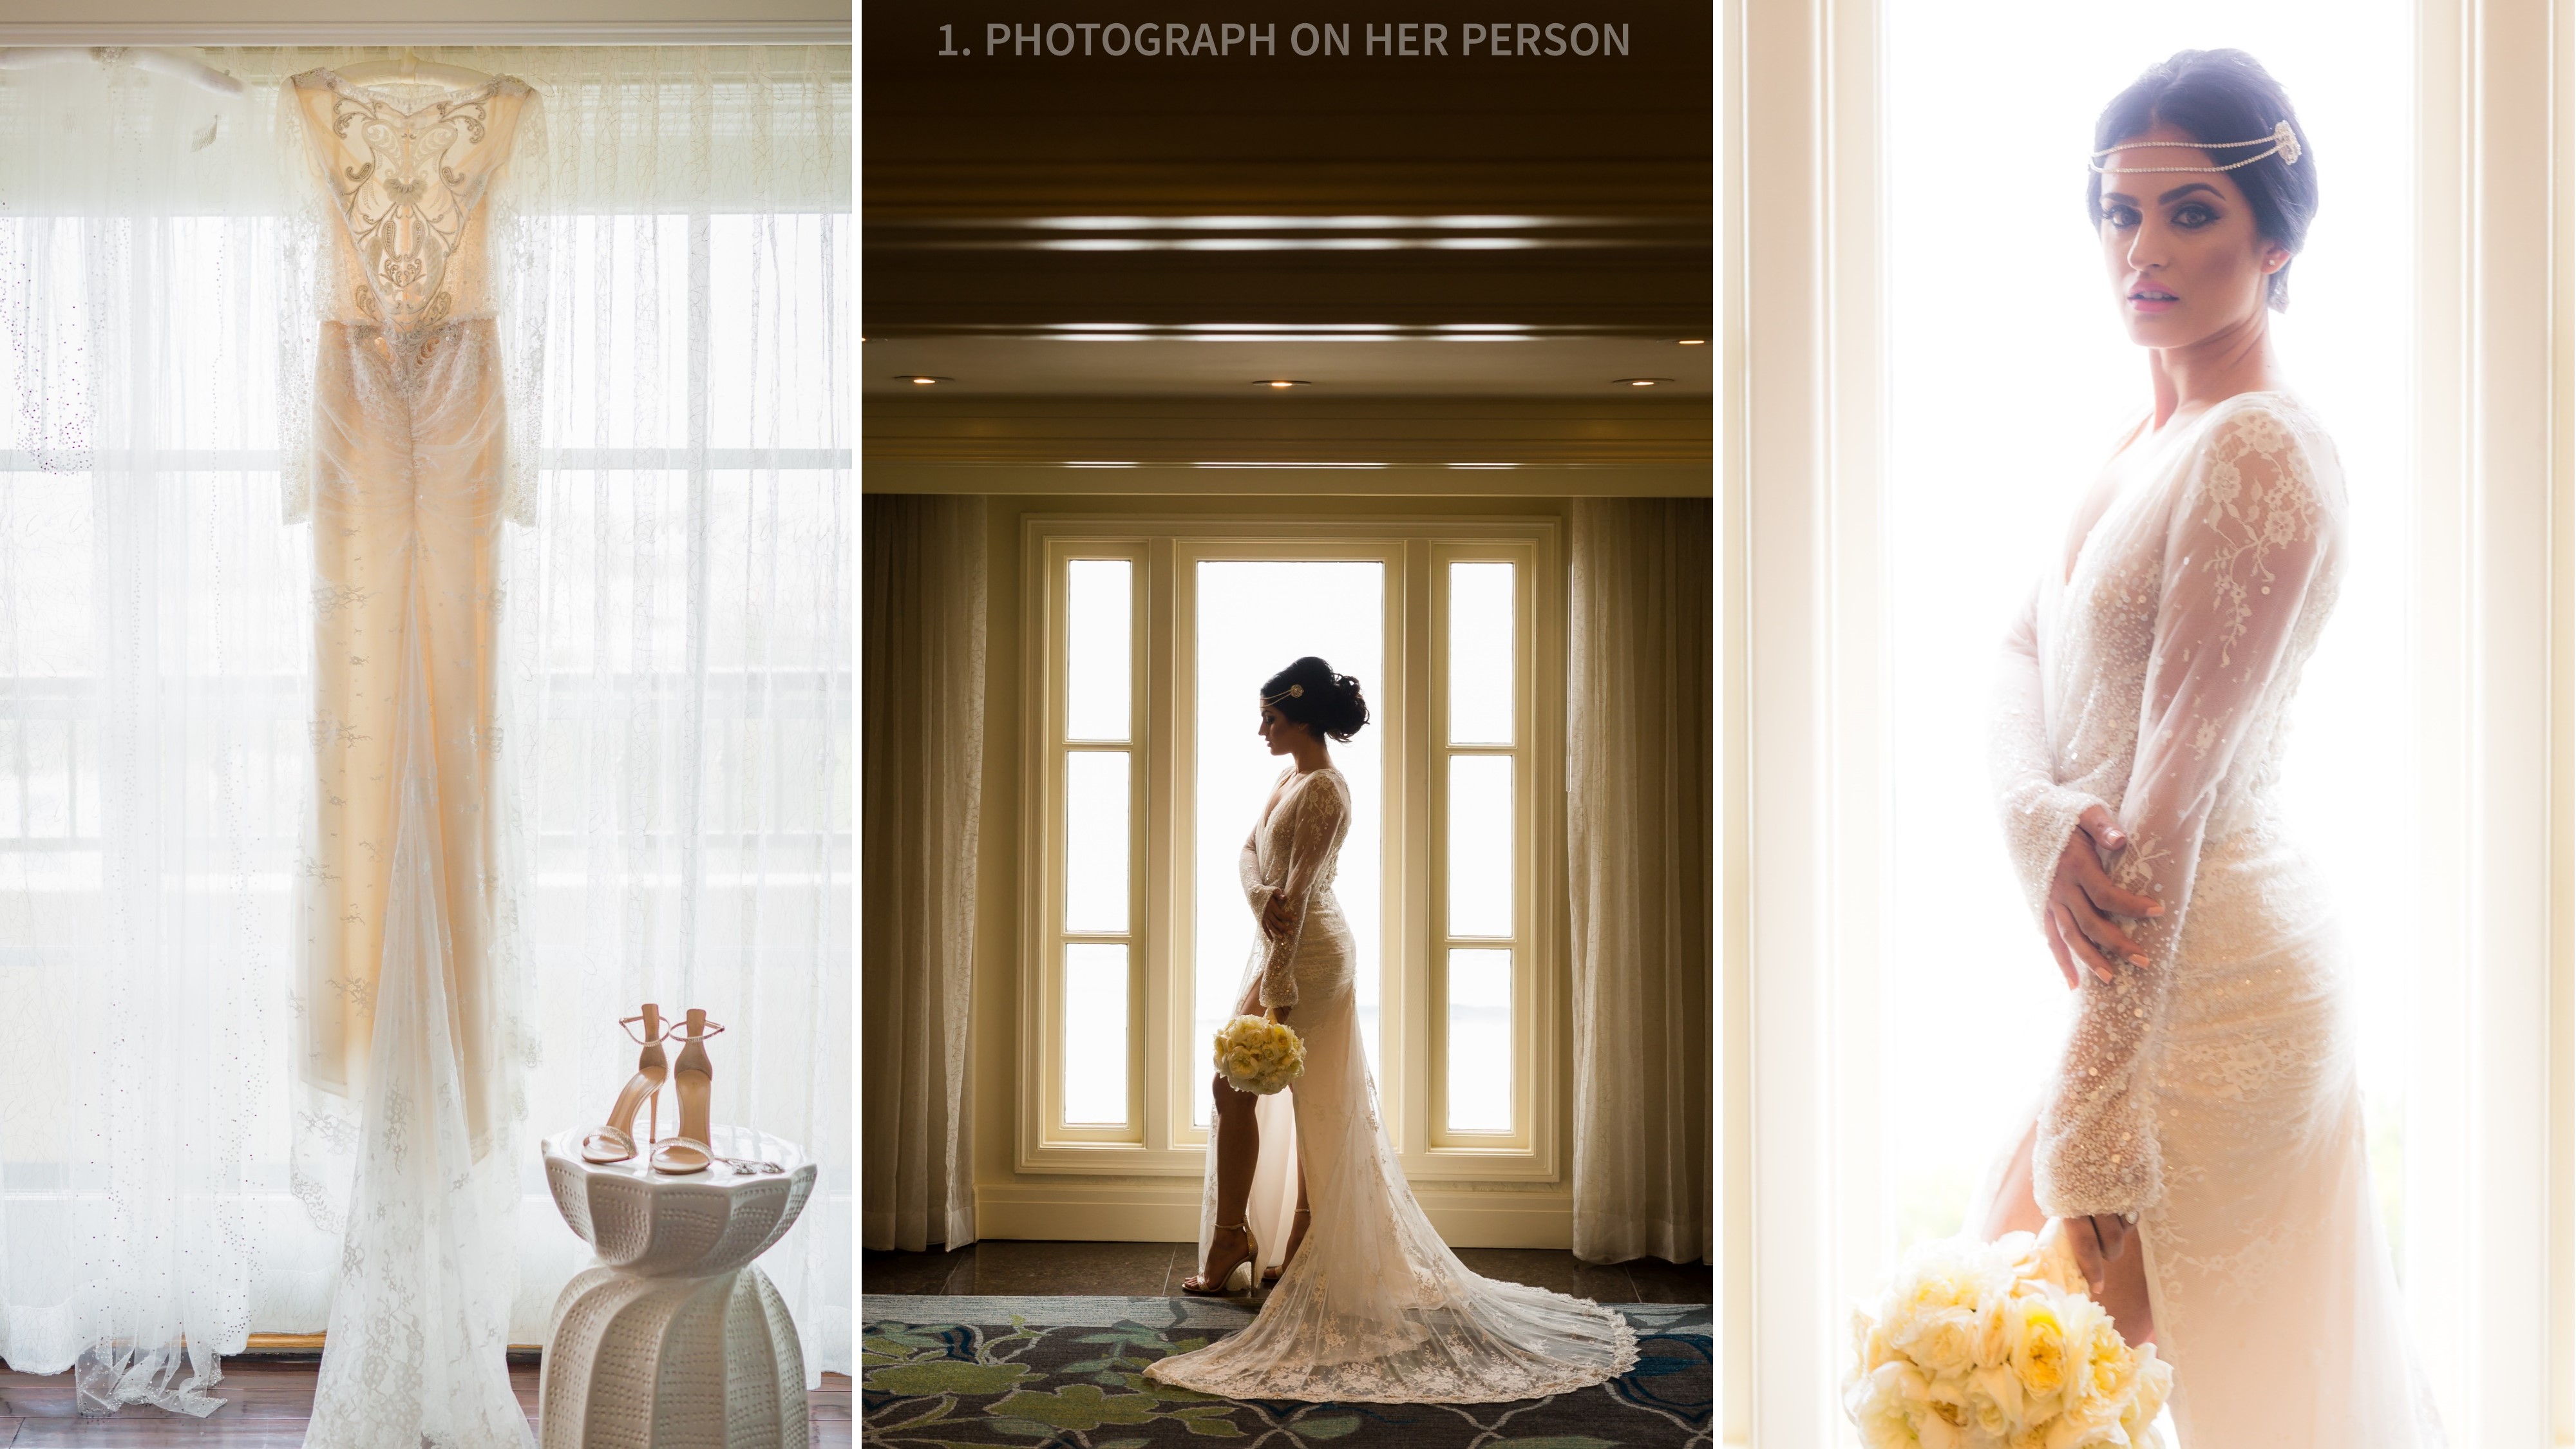 Wedding Workshop Three | Photographing The Bride: 10 Tips On Photographing The Bride’s Details – Must Haves & More